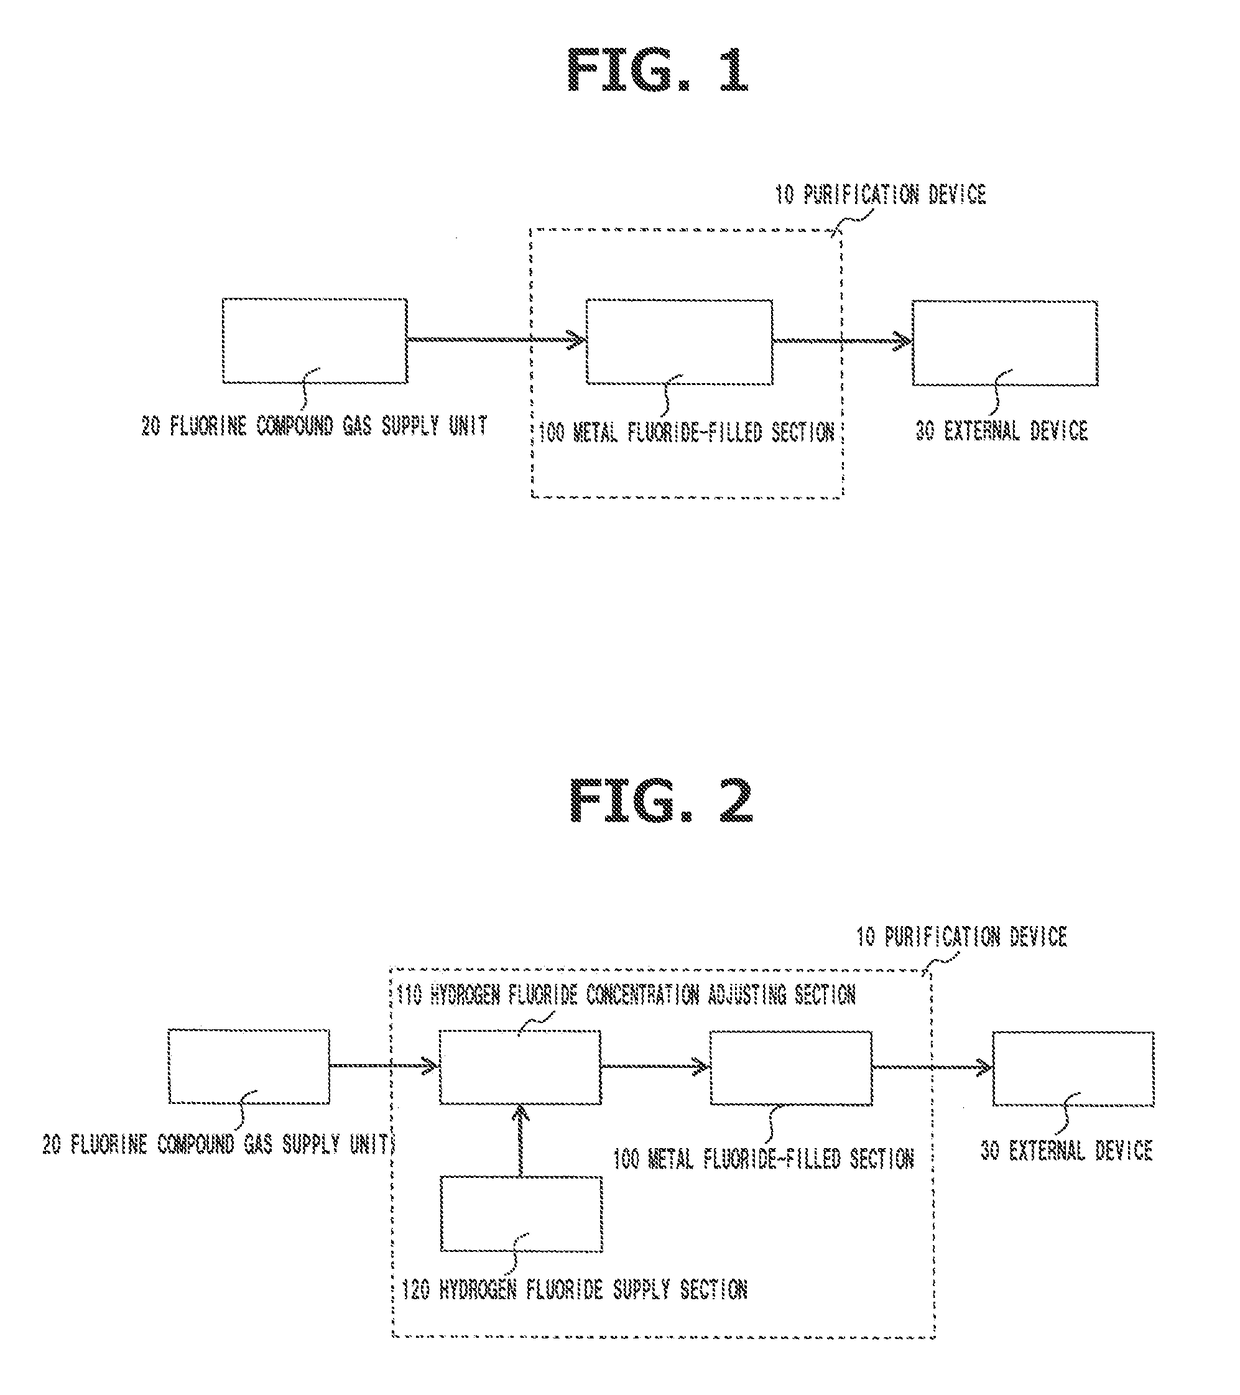 Method for Purifying Fluorine Compound Gas